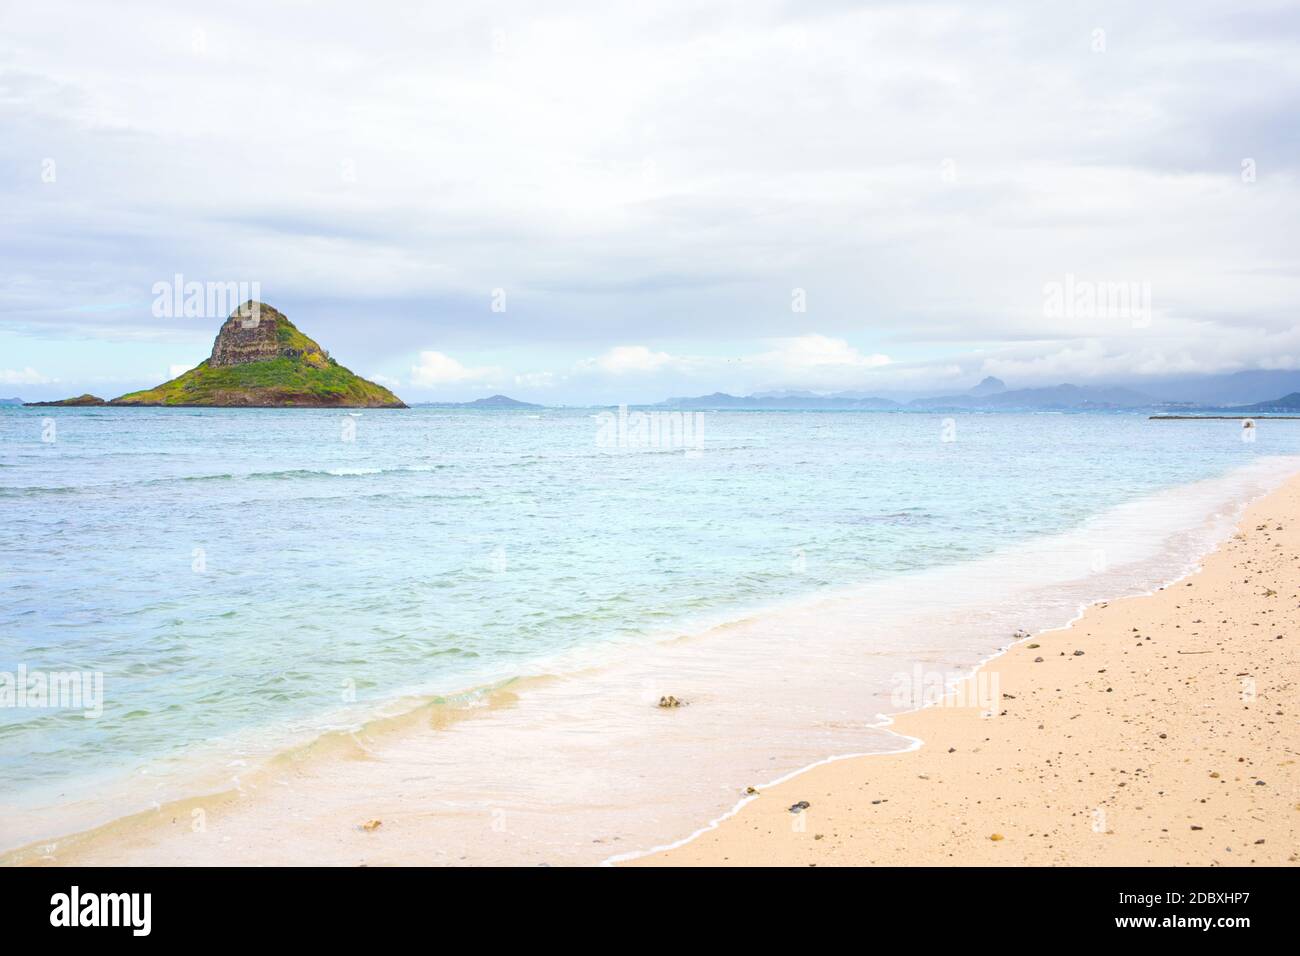 Empty Kualoa Beach Park on cloudy day with Mokoli'i Island (previously known as the outdated term 'Chinaman's Hat') island in background Stock Photo